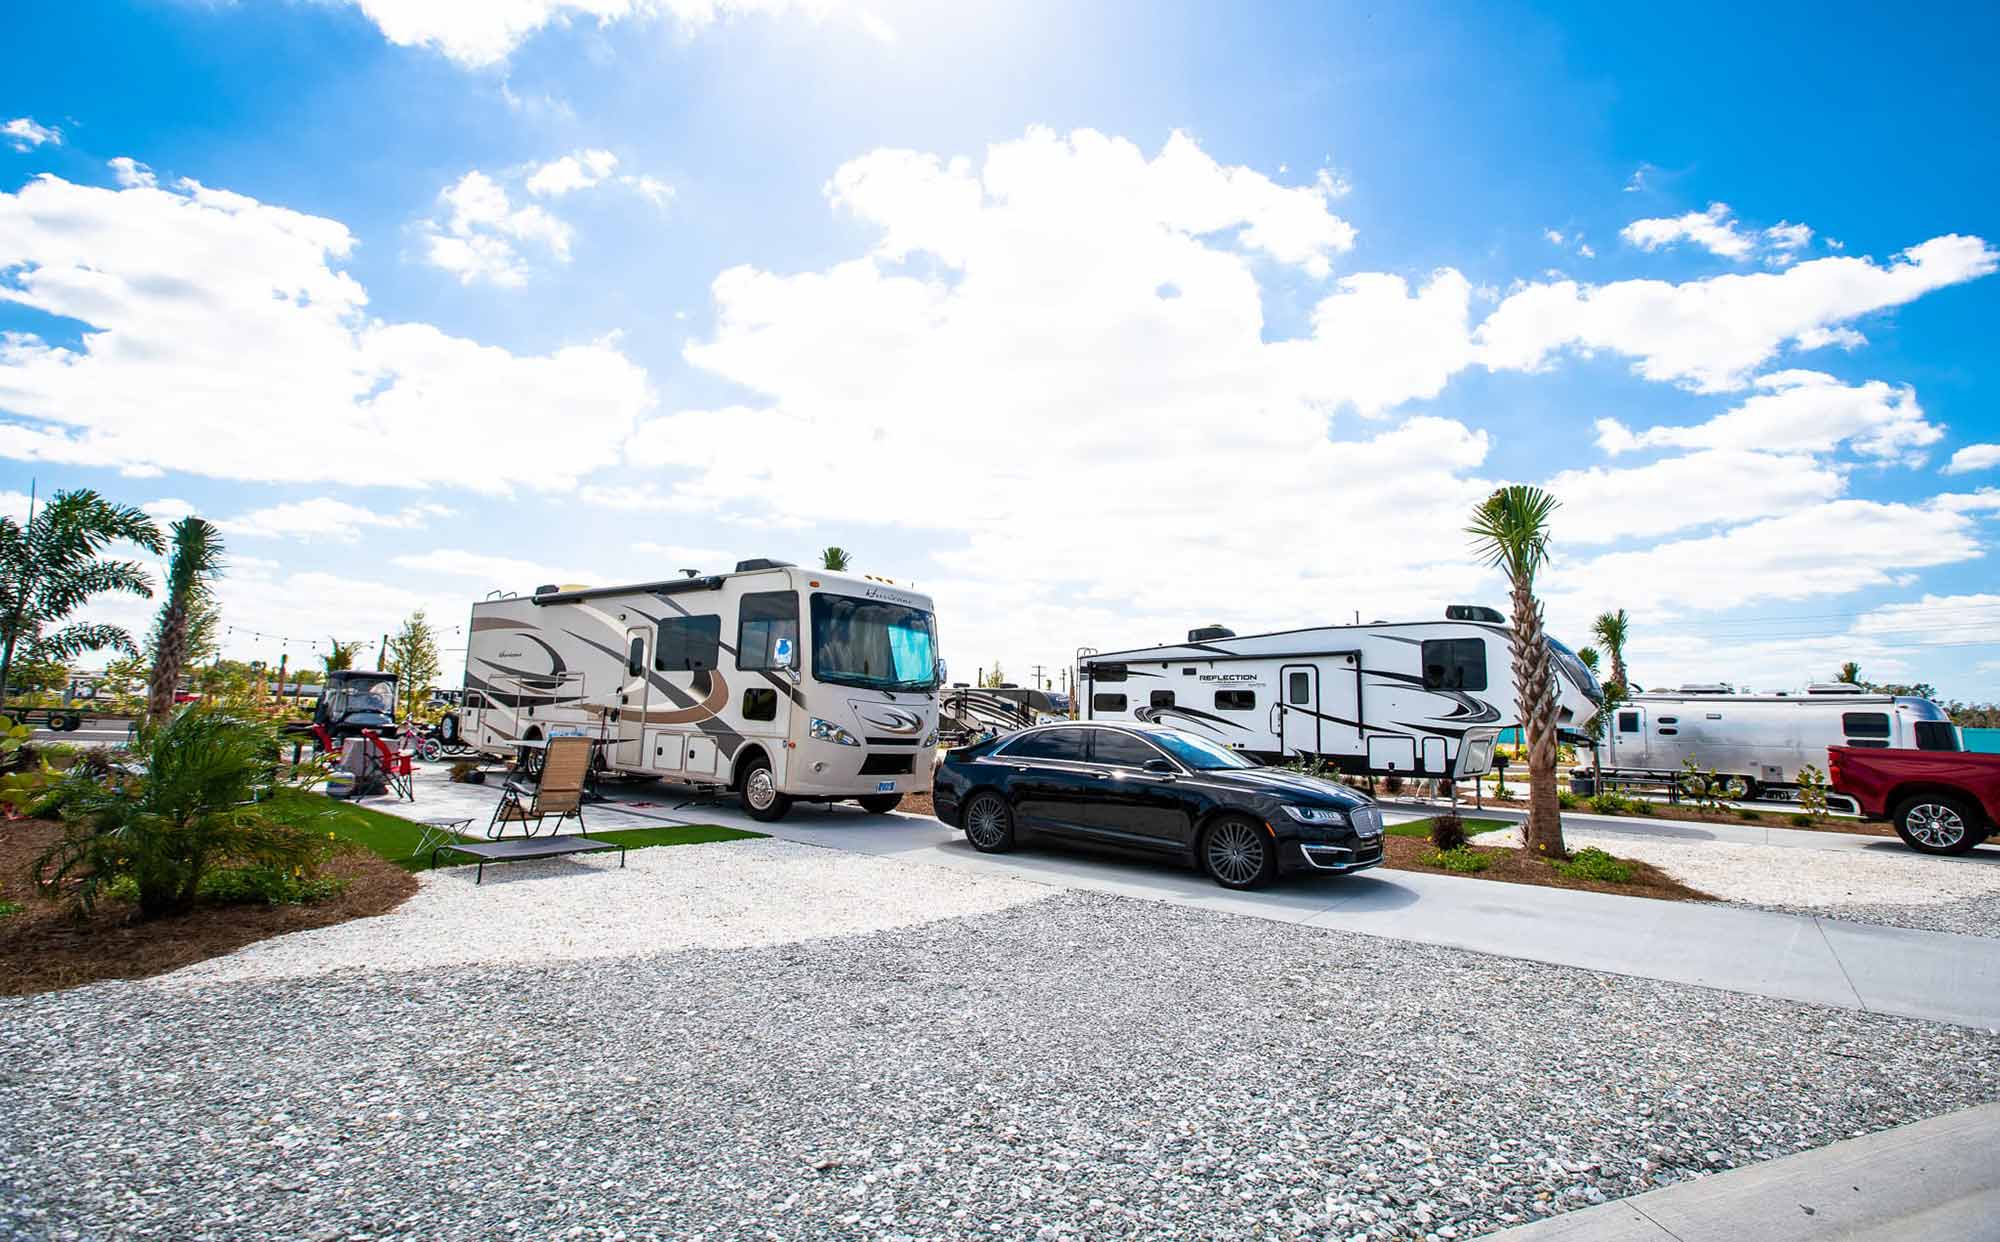 RVs and campers at Camp Margaritaville RV Resort in Auburndale Florida